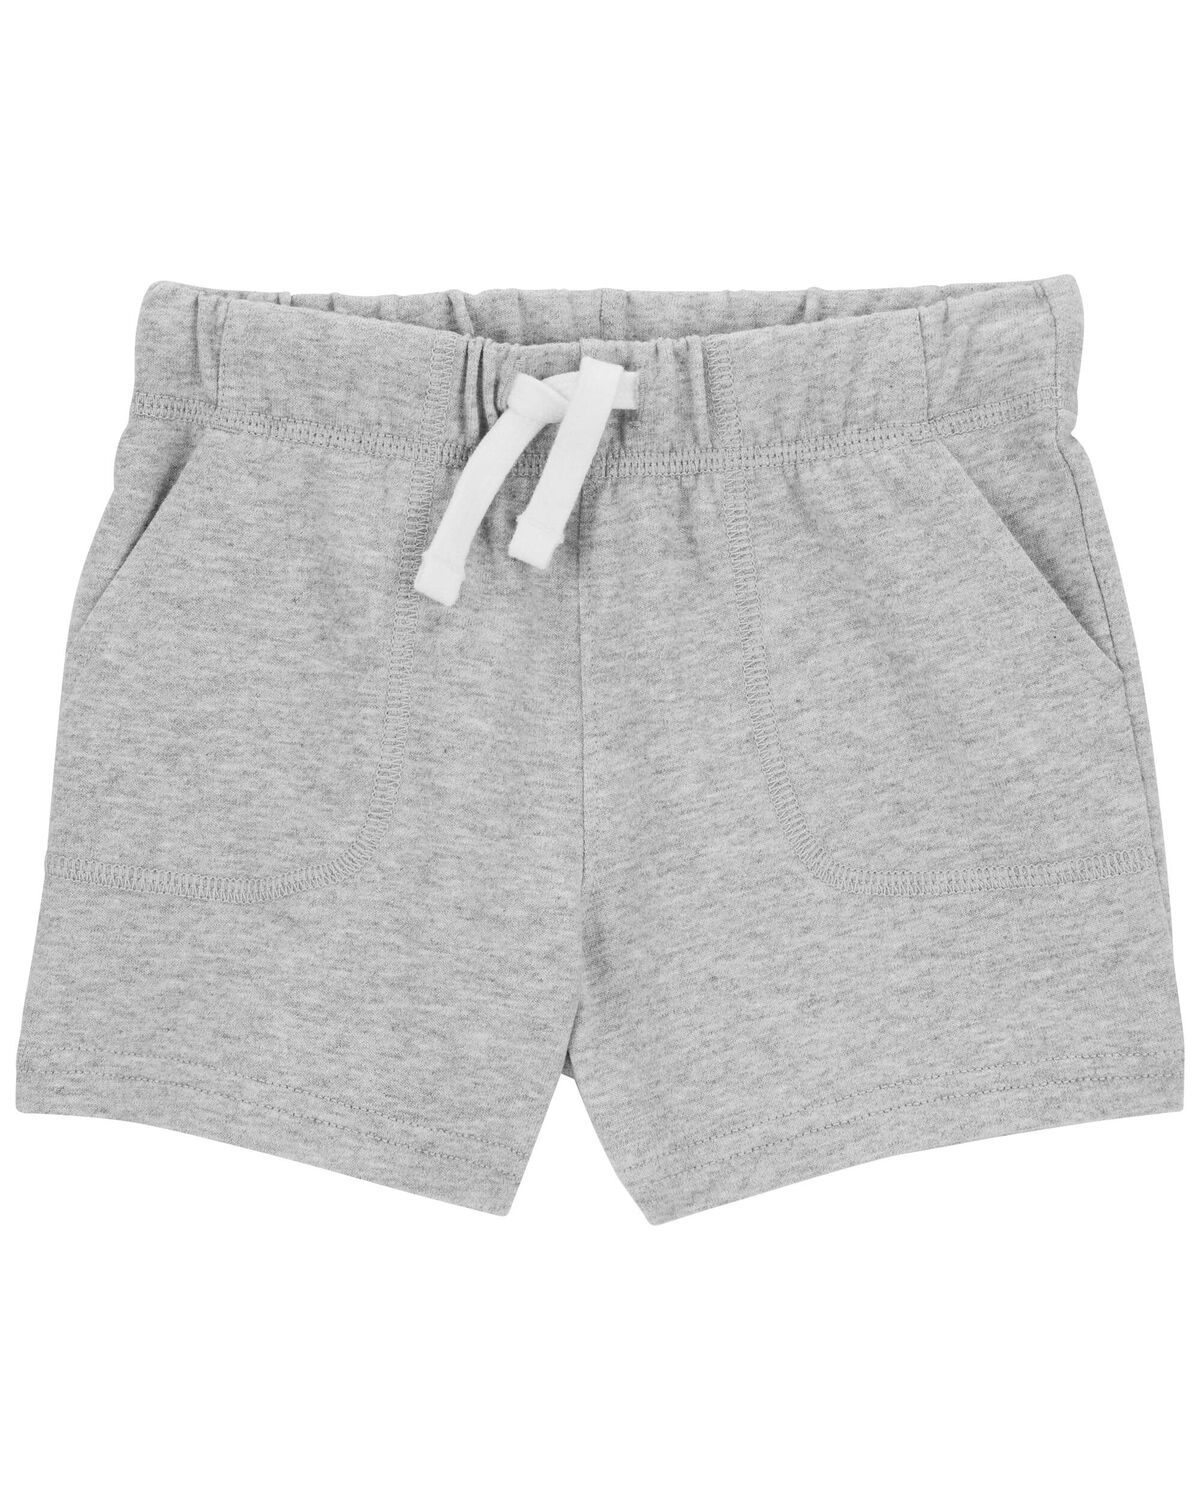 Grey Baby Pull-On Cotton Shorts | carters.com | Carter's